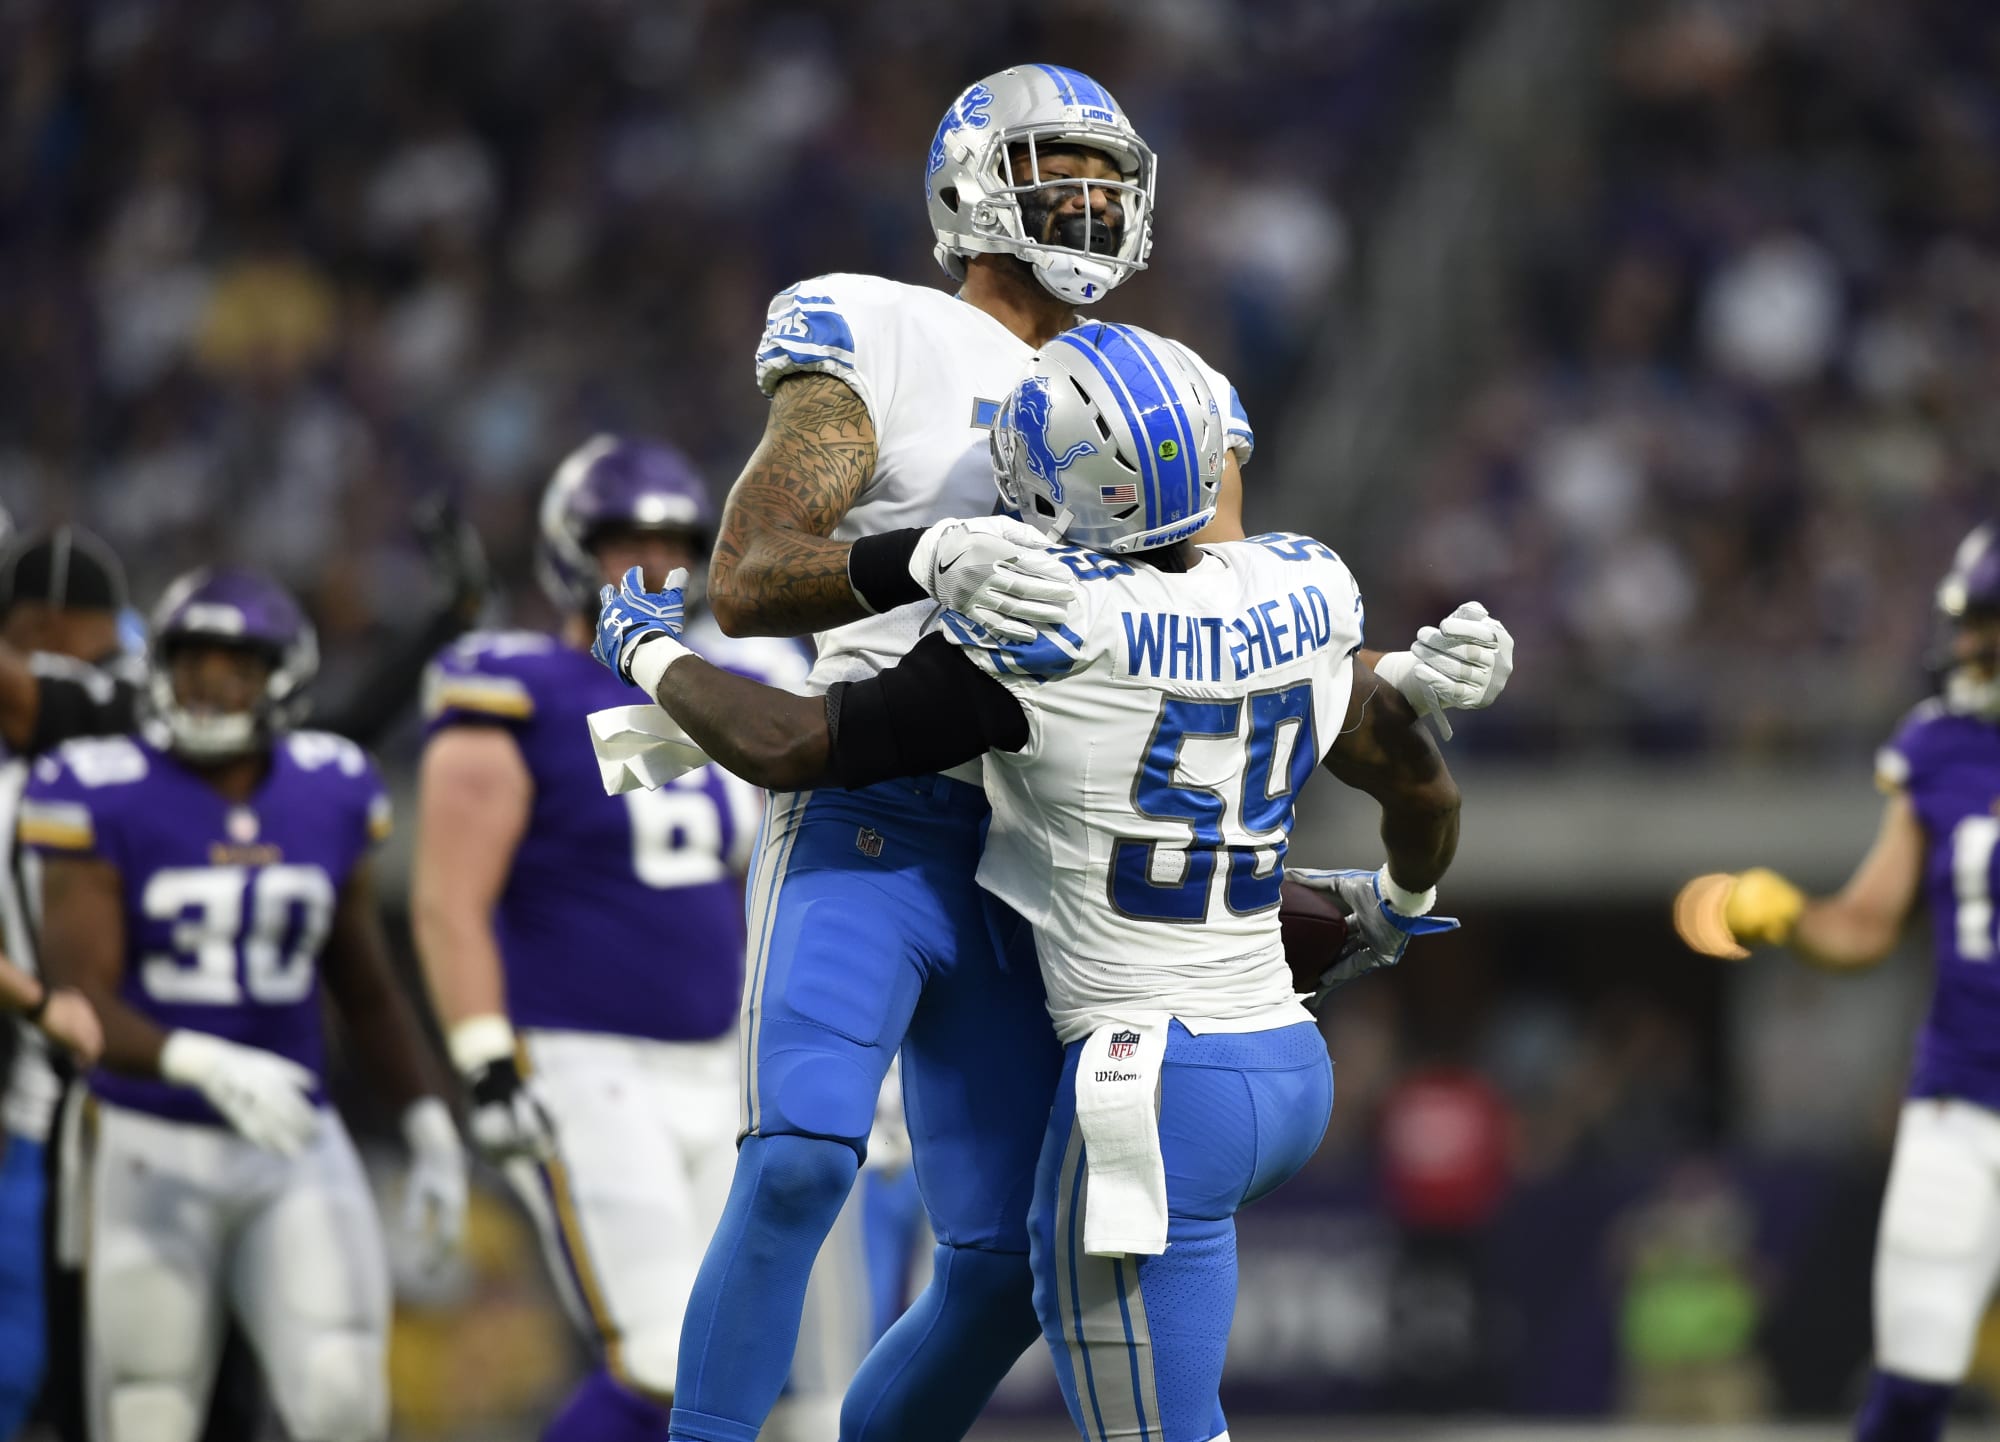 Lions vs. Vikings: Highlights, game tracker and more